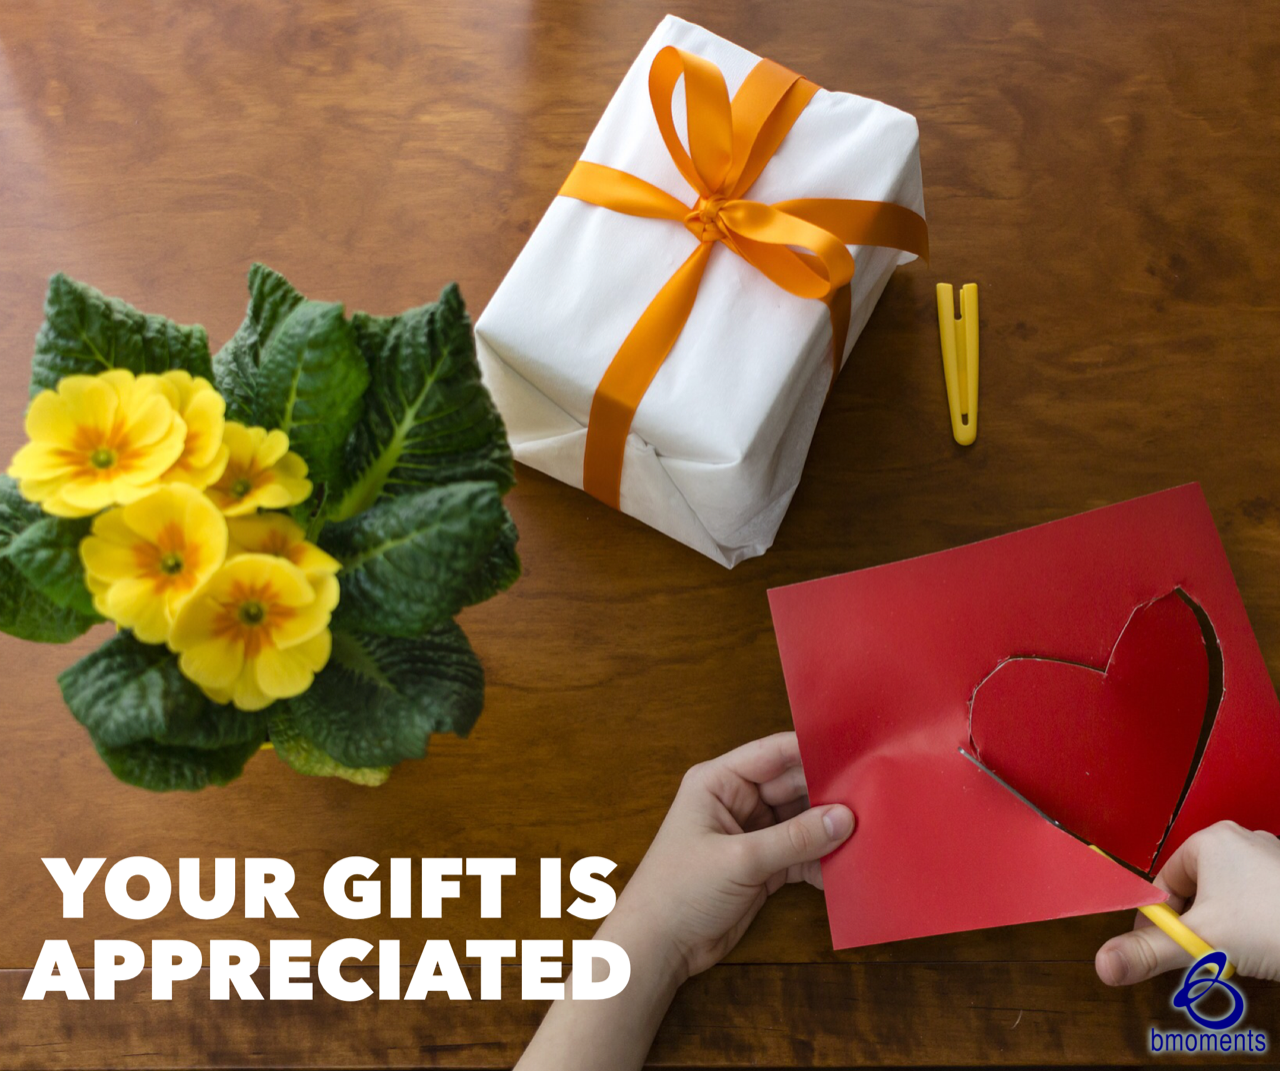 Your Small Gift Has a Big Impact